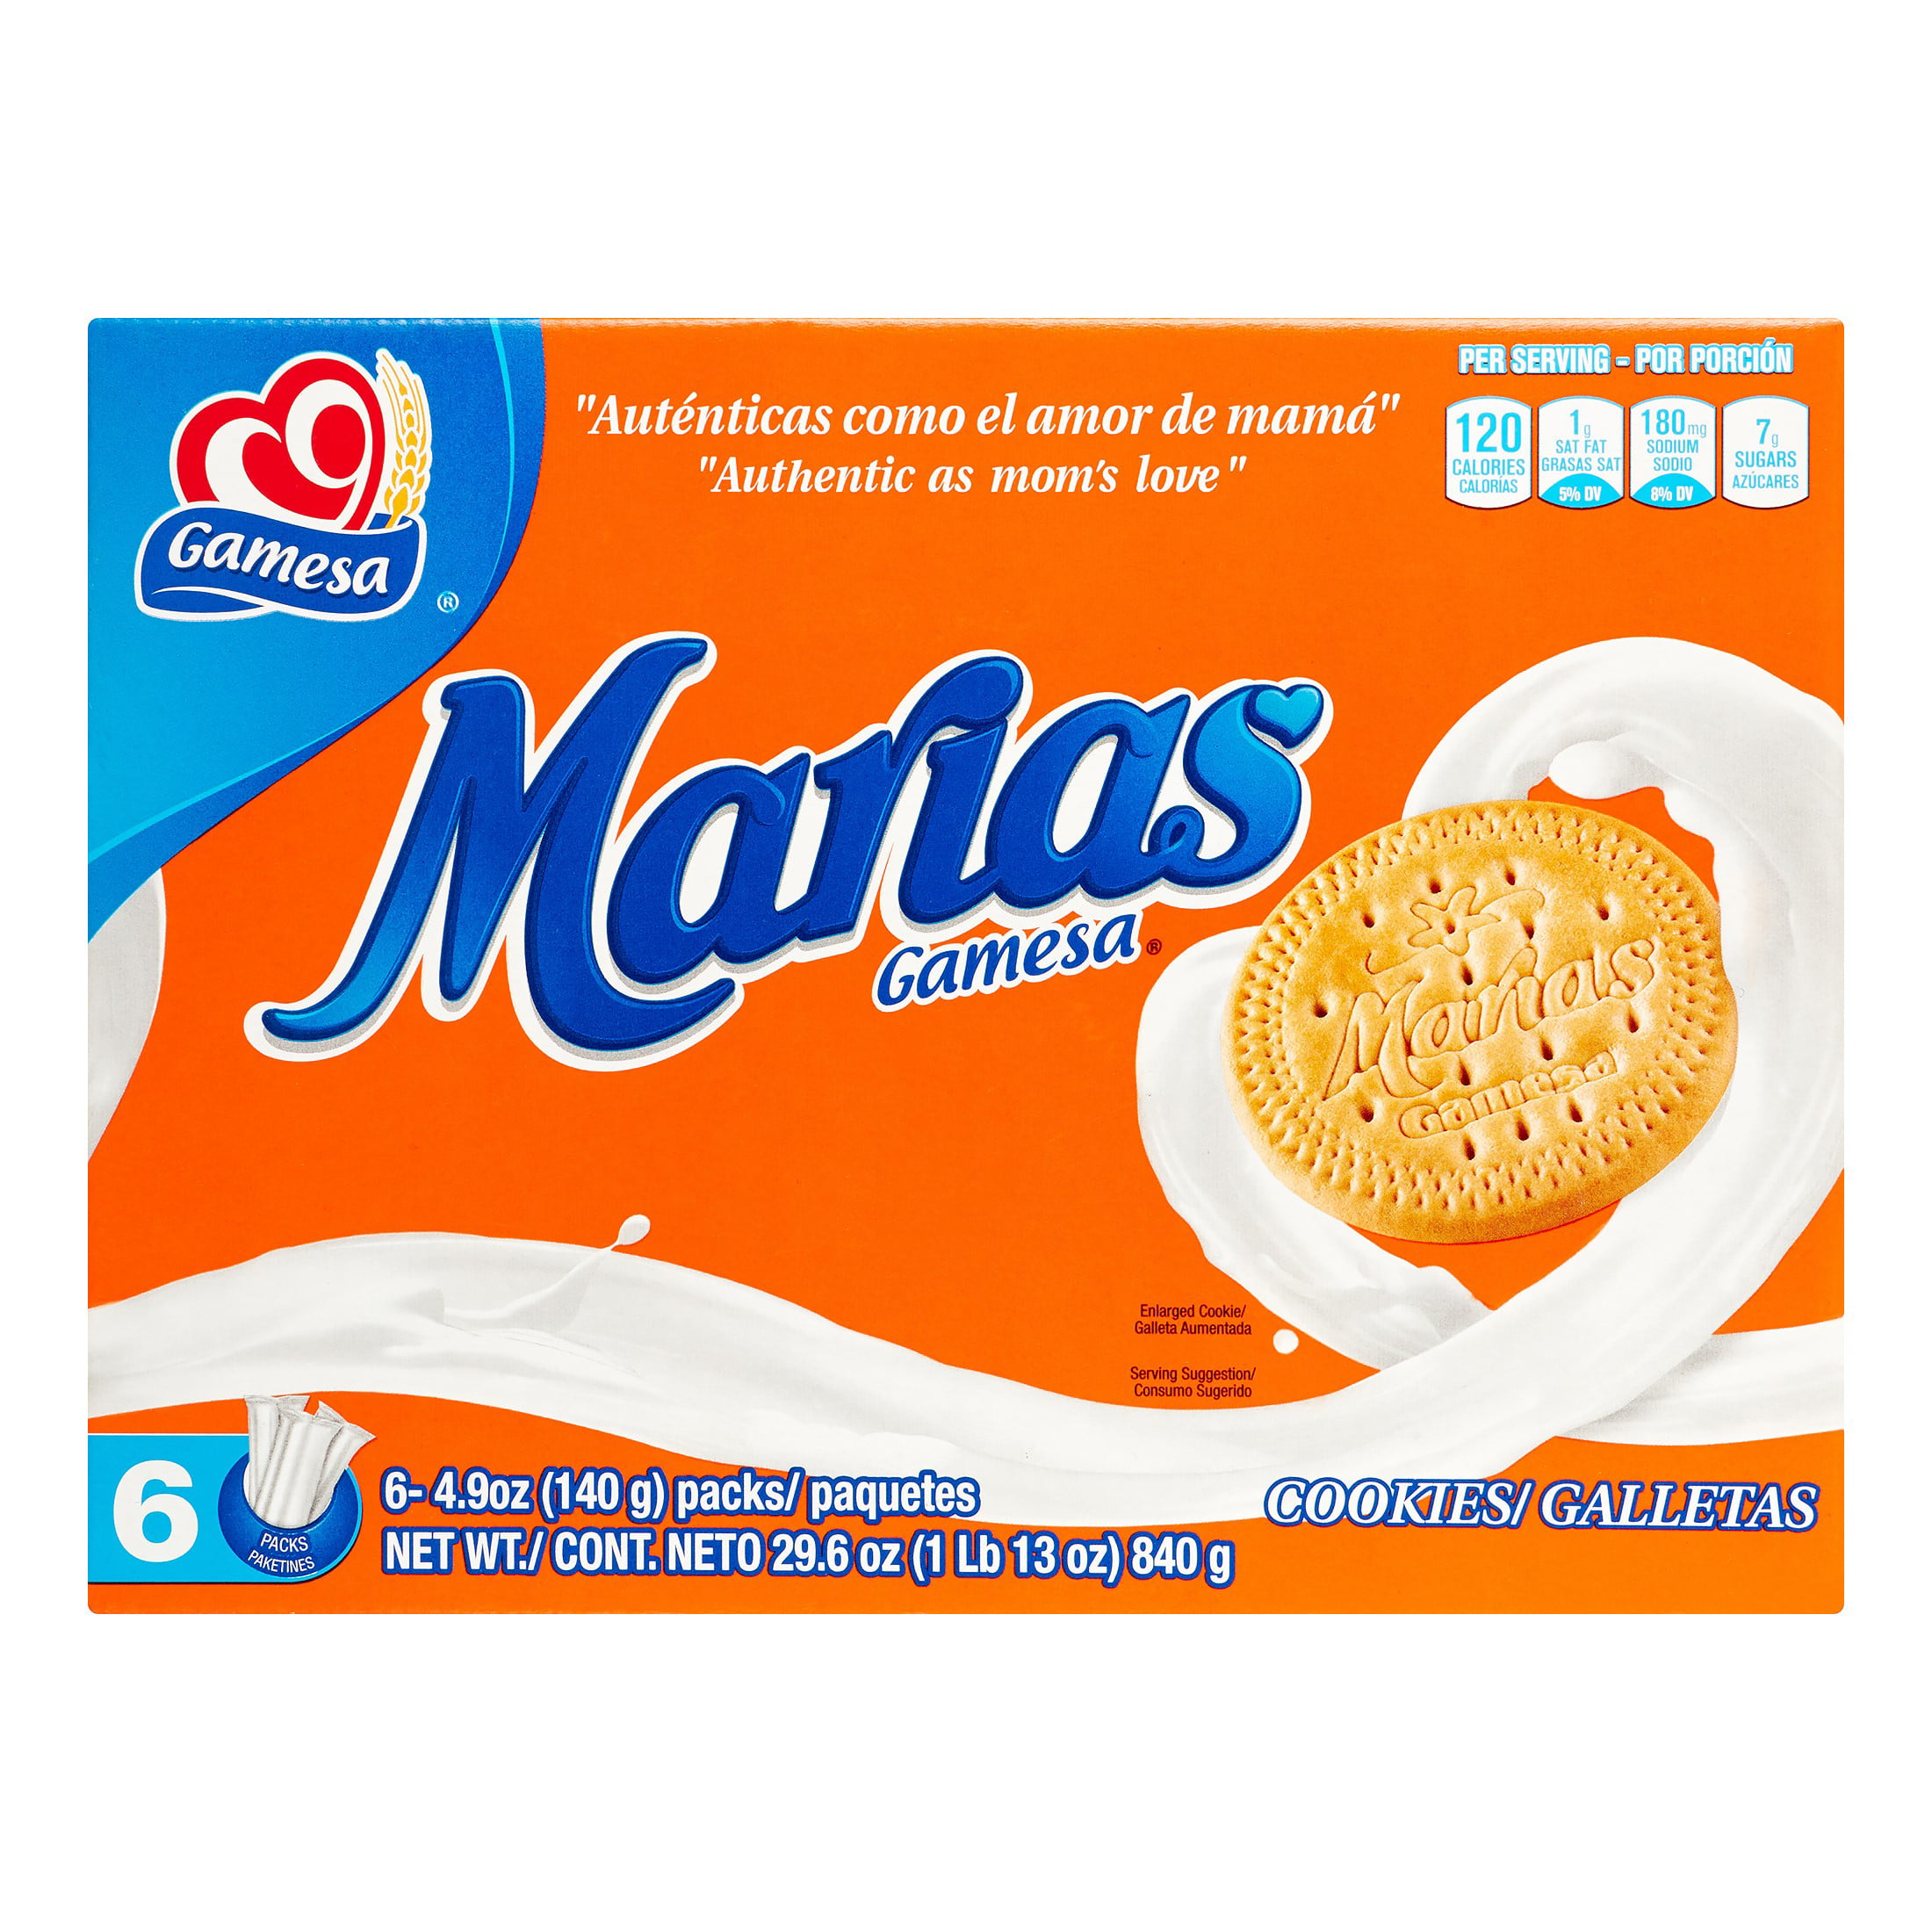 Gamesa Maria Cookies Nutrition Info The Best Wallpaper Images.